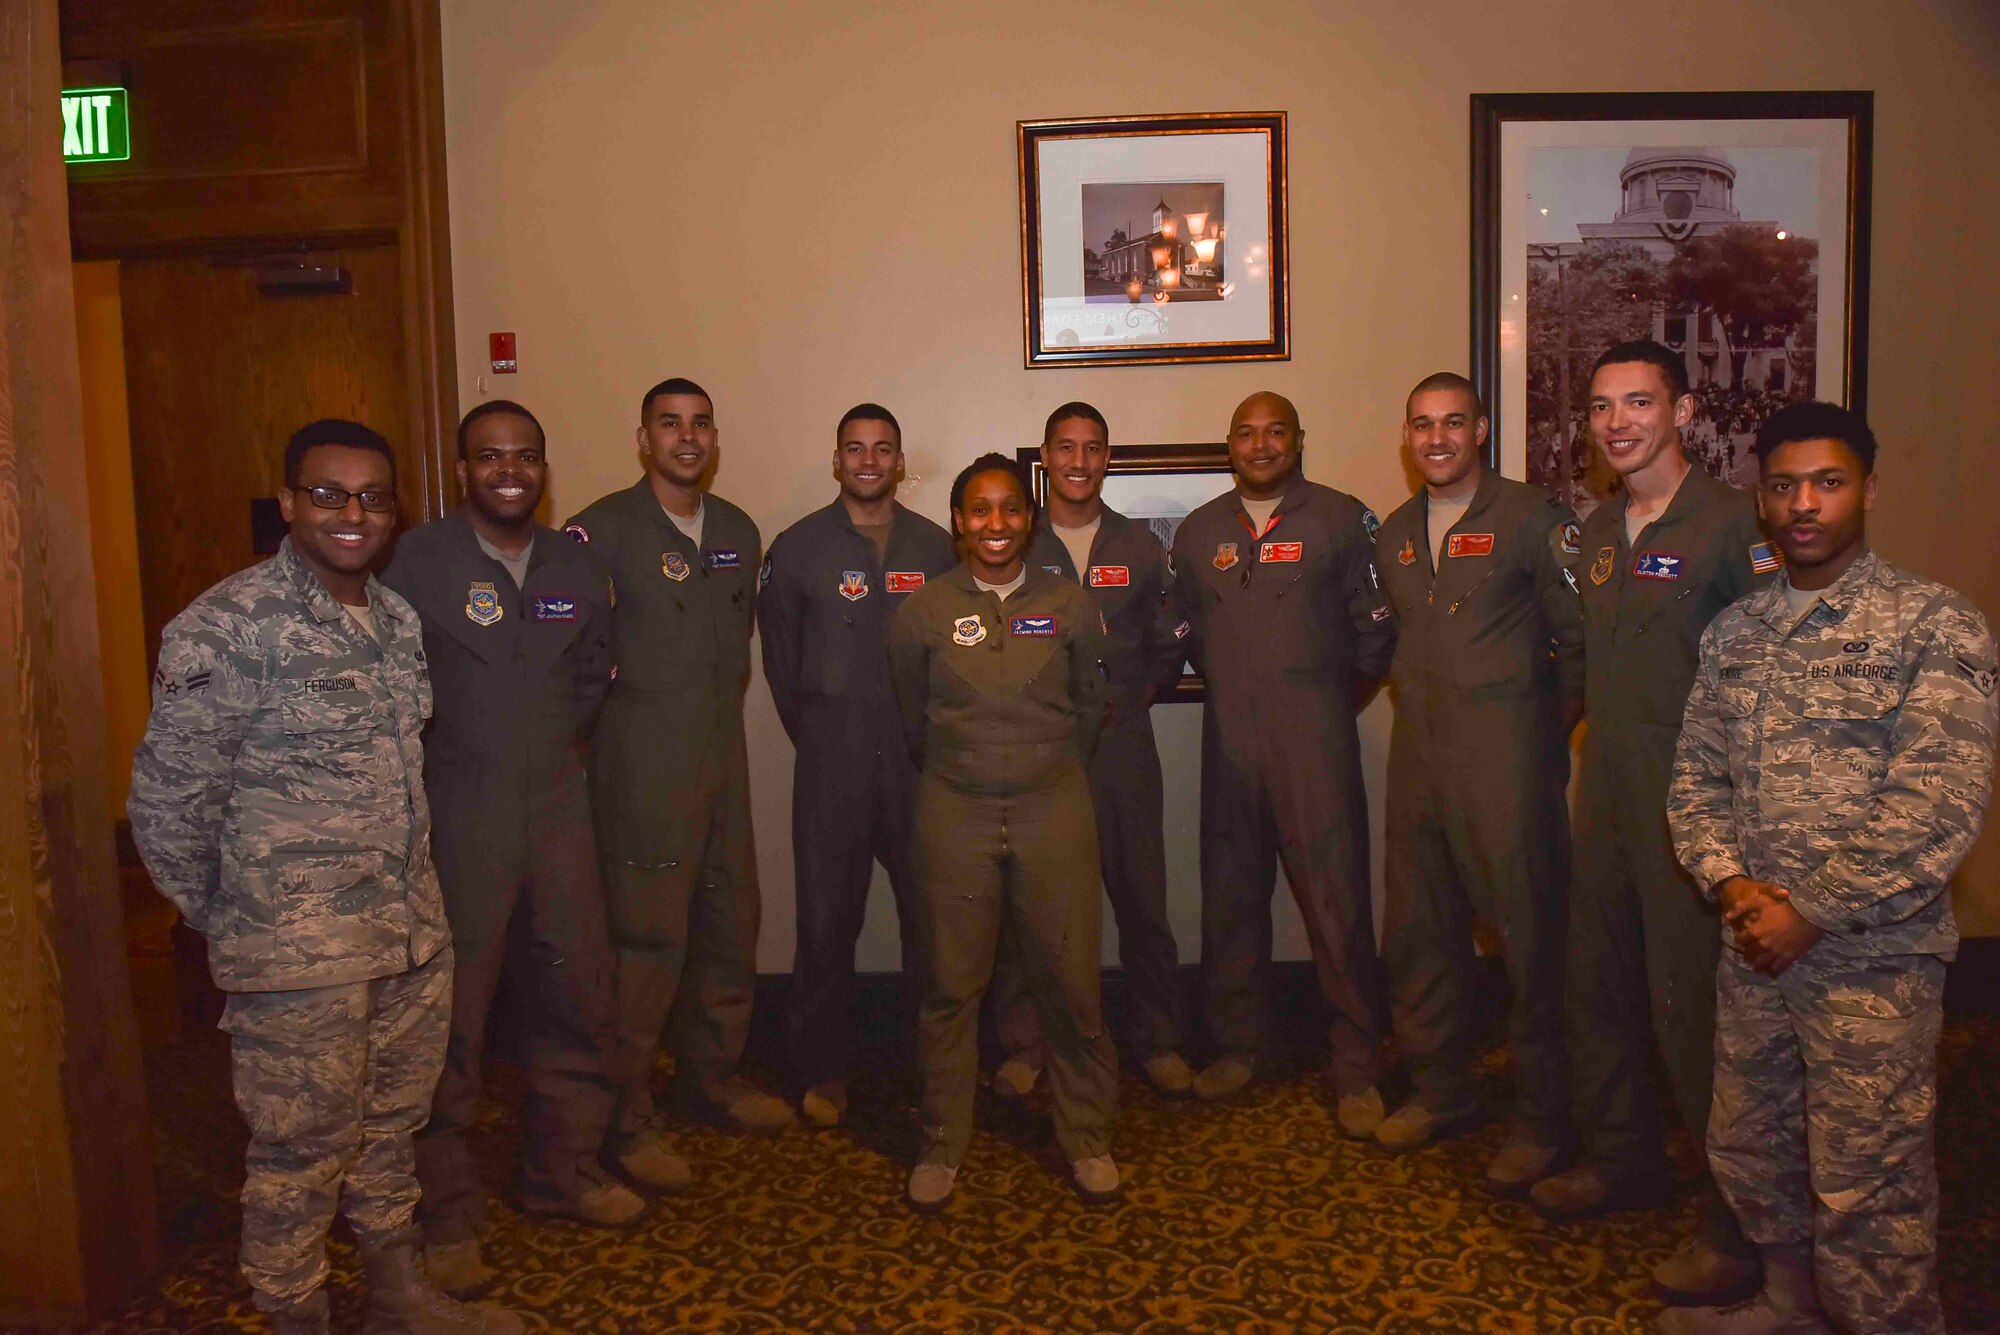 Fairchild Air Force Base Airmen pose for a photo with Red Tail Squadron members of 187th Fighter Wing in Montgomery, Alabama, Feb. 18, 2020. Team Fairchild Airmen refueled F-16 Fighting Falcons piloted by the Airmen from the Red Tail Squadron in honor of Black History Month. (U.S. Air Force photo by Airman 1st Class Kiaundra Miller)